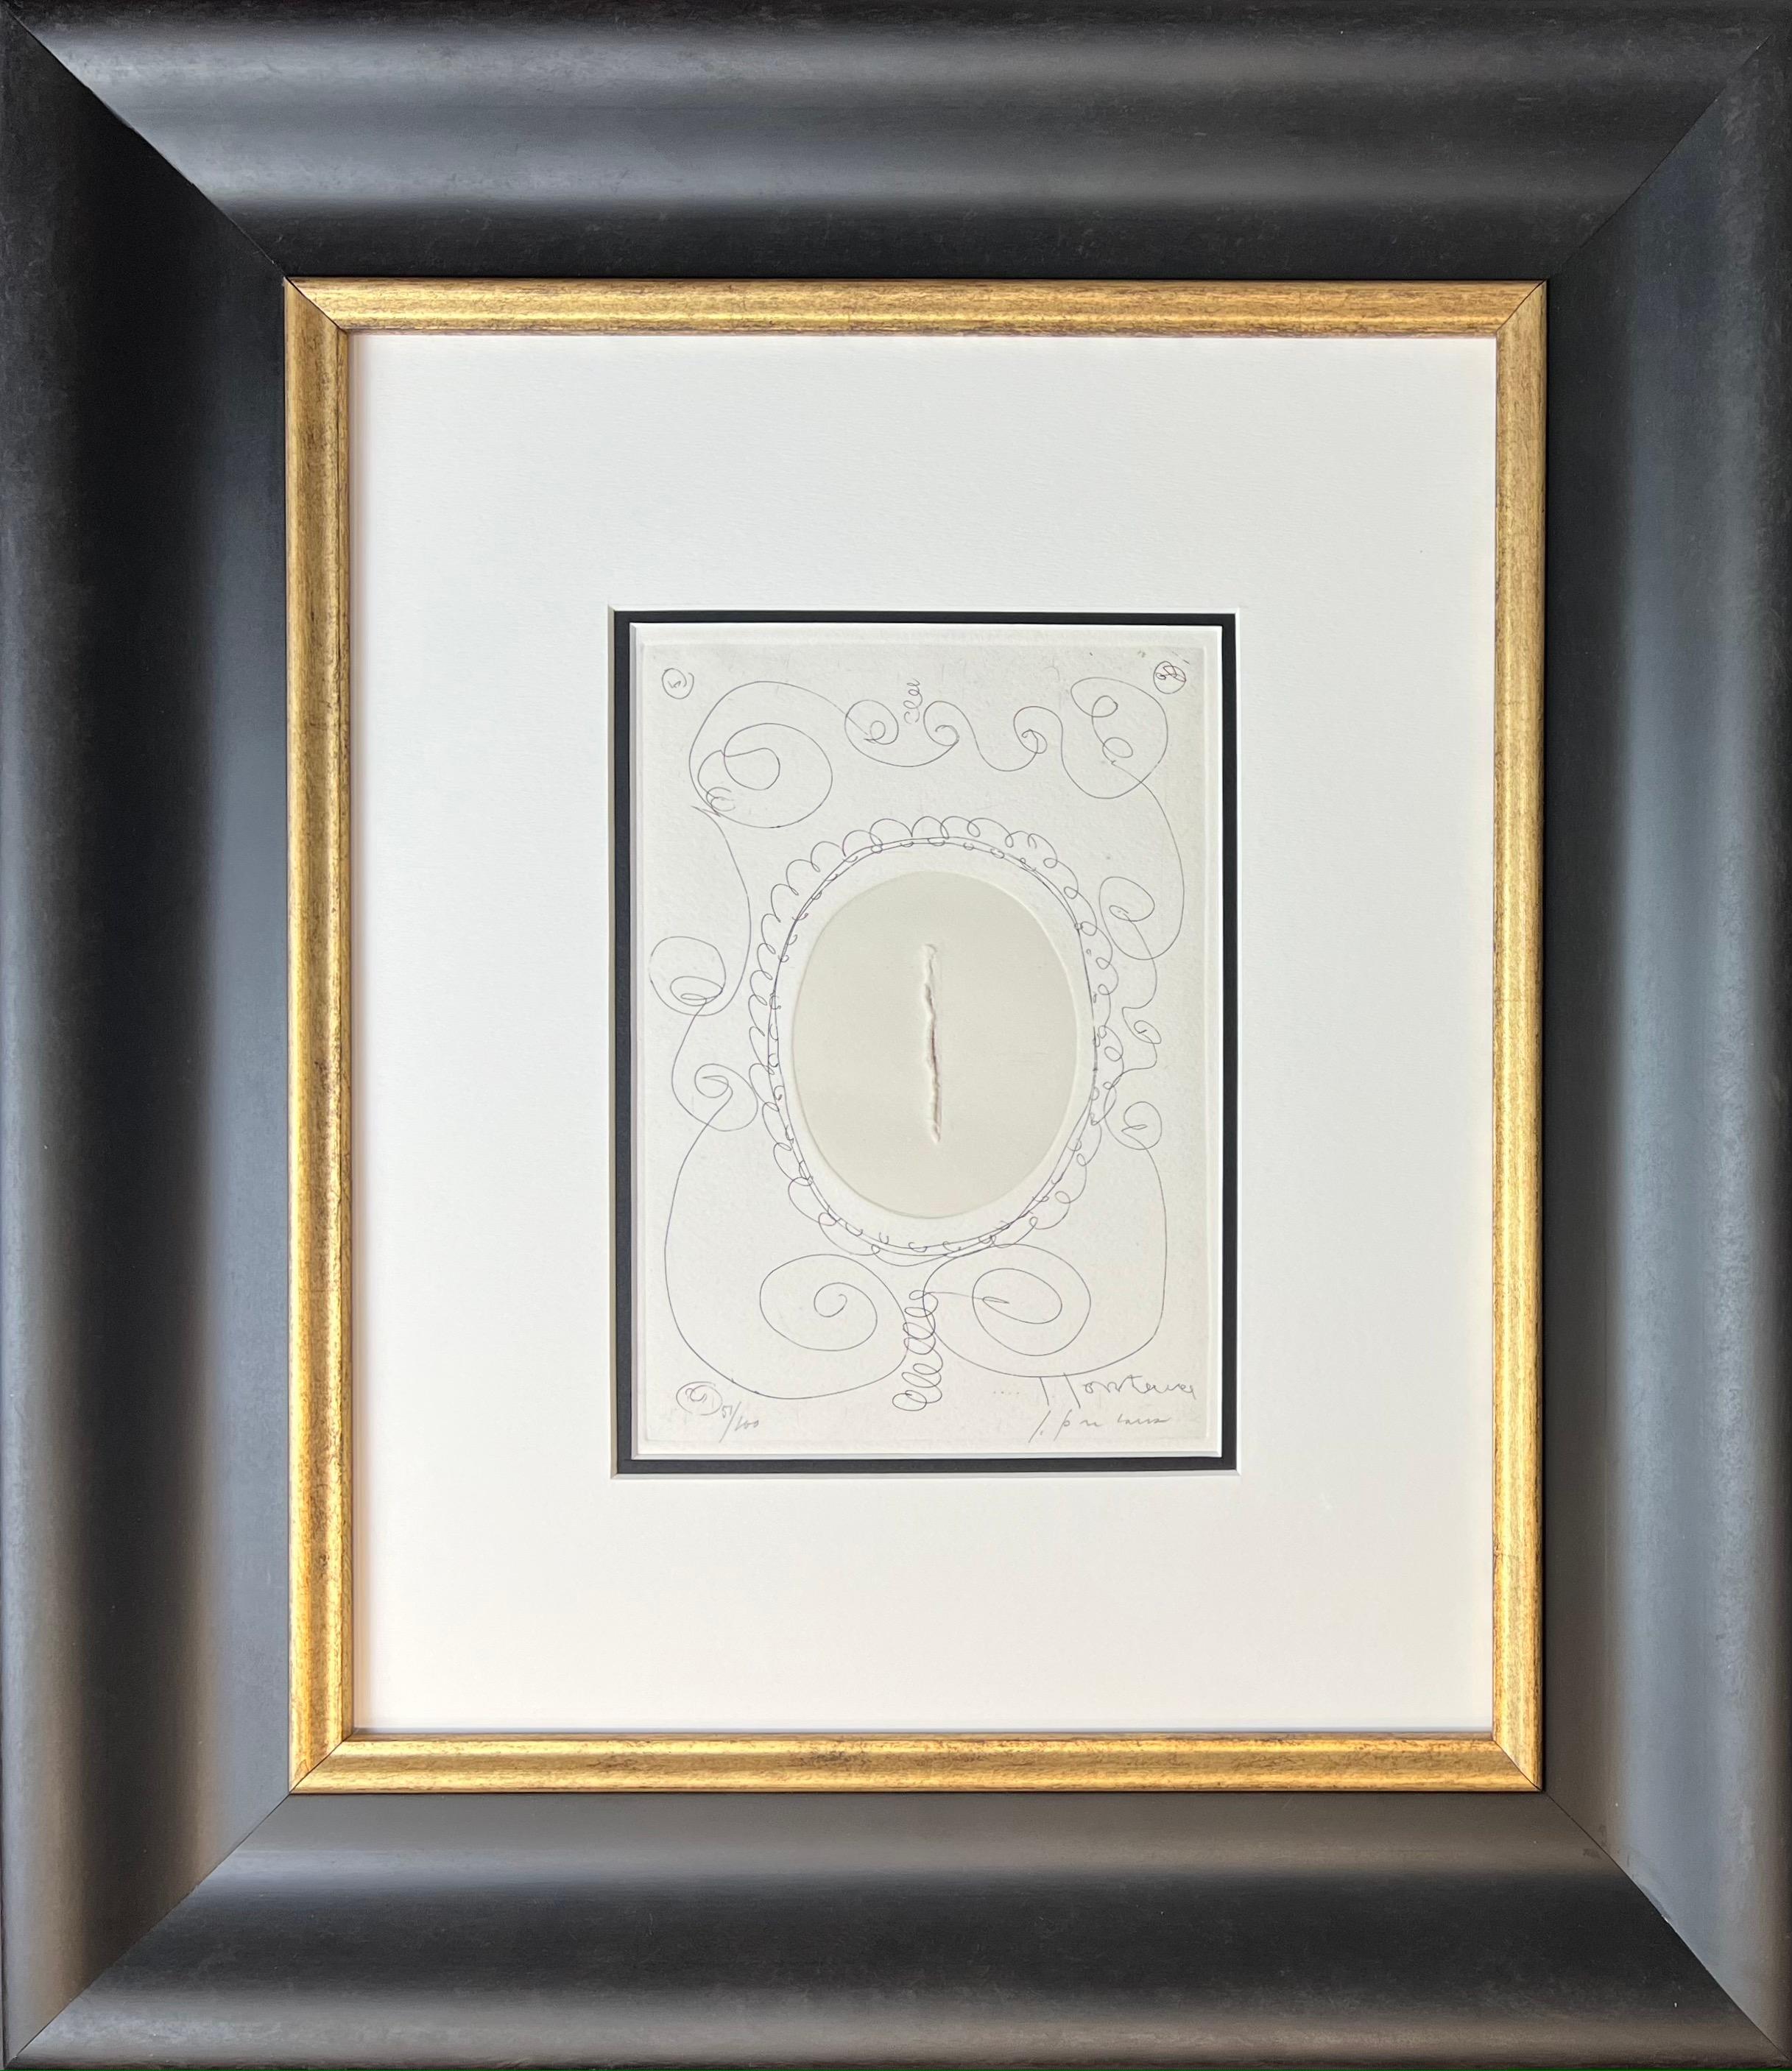 Etching and Aquatint on paper
with cut executed by Lucio Fontana , edited in 1966
Limited Edition of 100 copies
signed in pencil by artist in lower right corner and numbered 51/100 in lower left corner
Paper size: 23 x 16 cm
framed size: 52,5 x 46